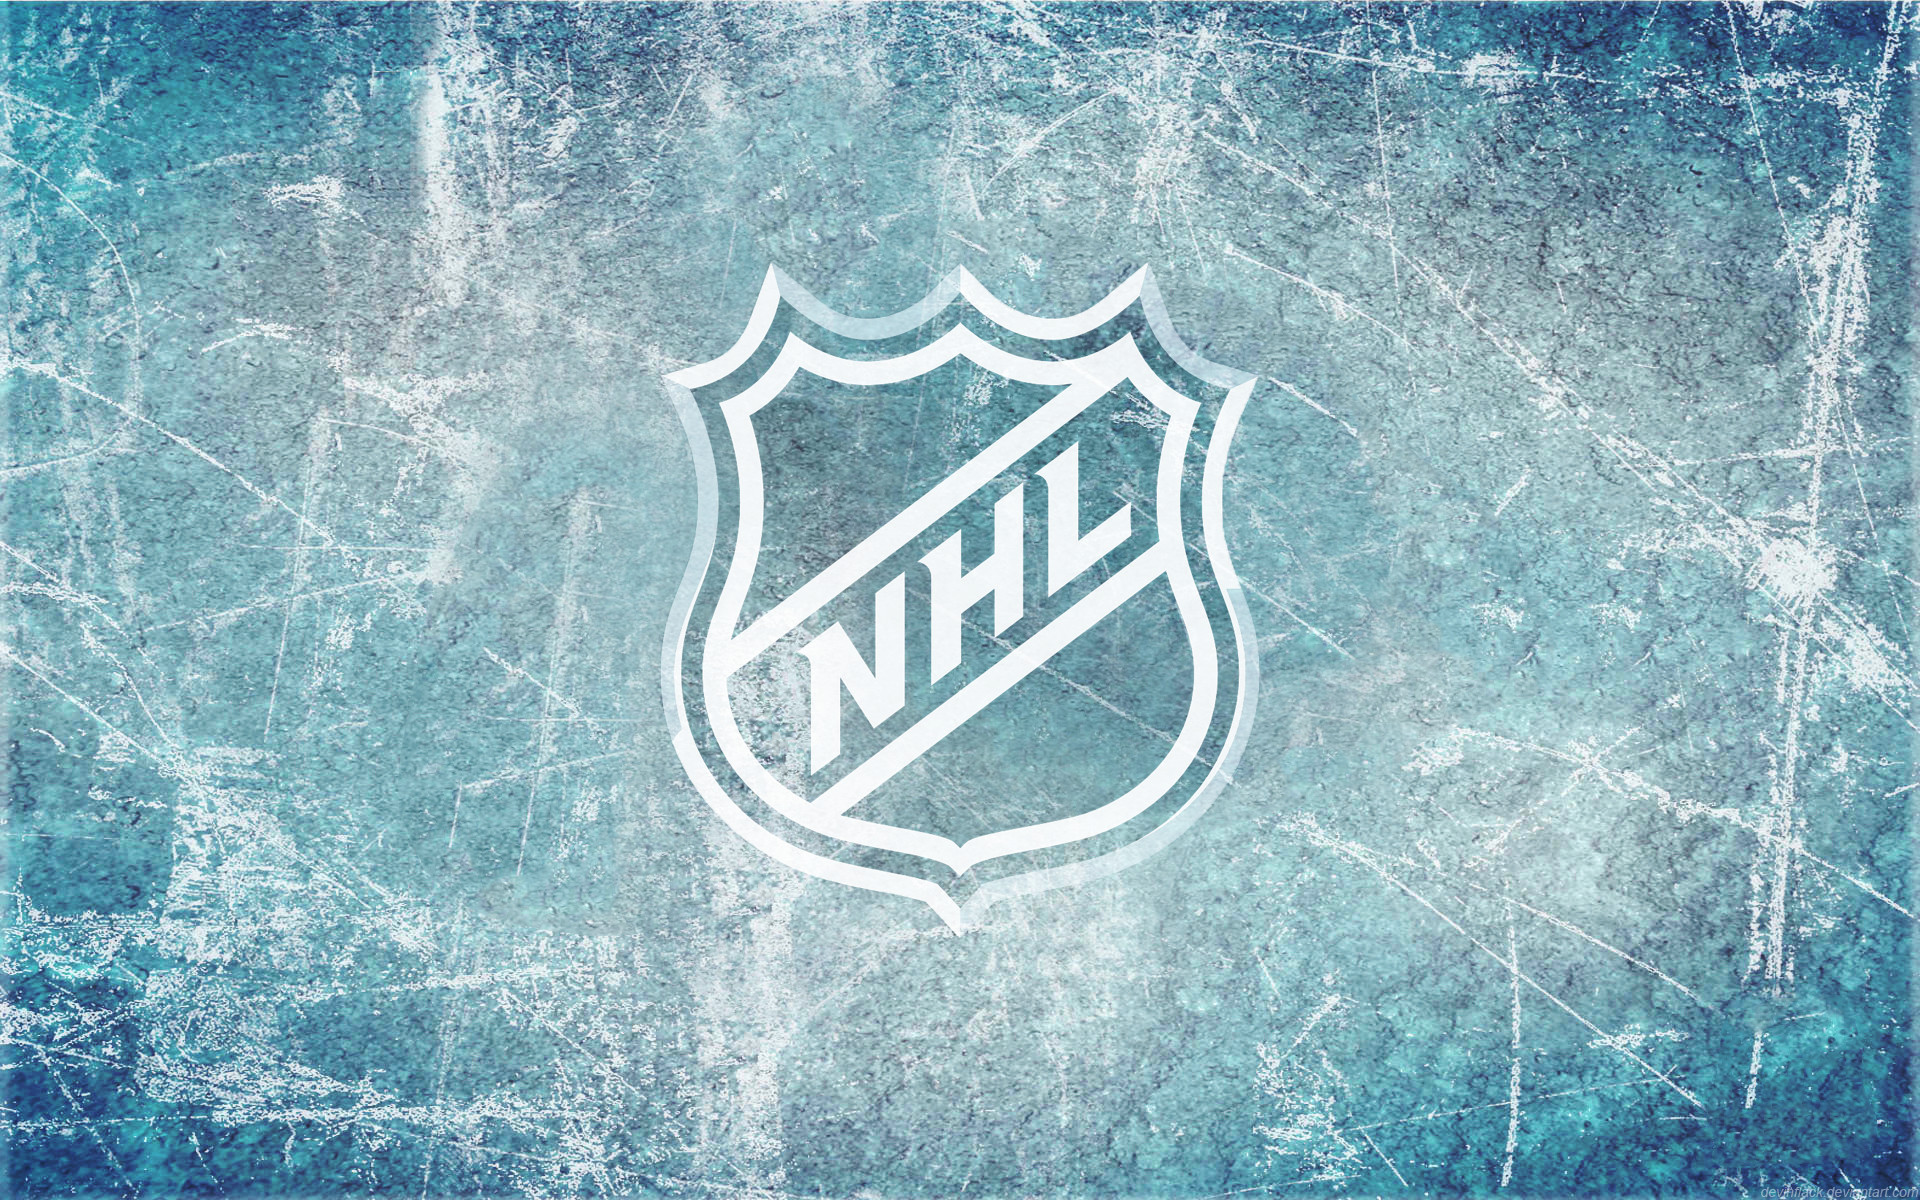 Cool Nhl Wallpapers